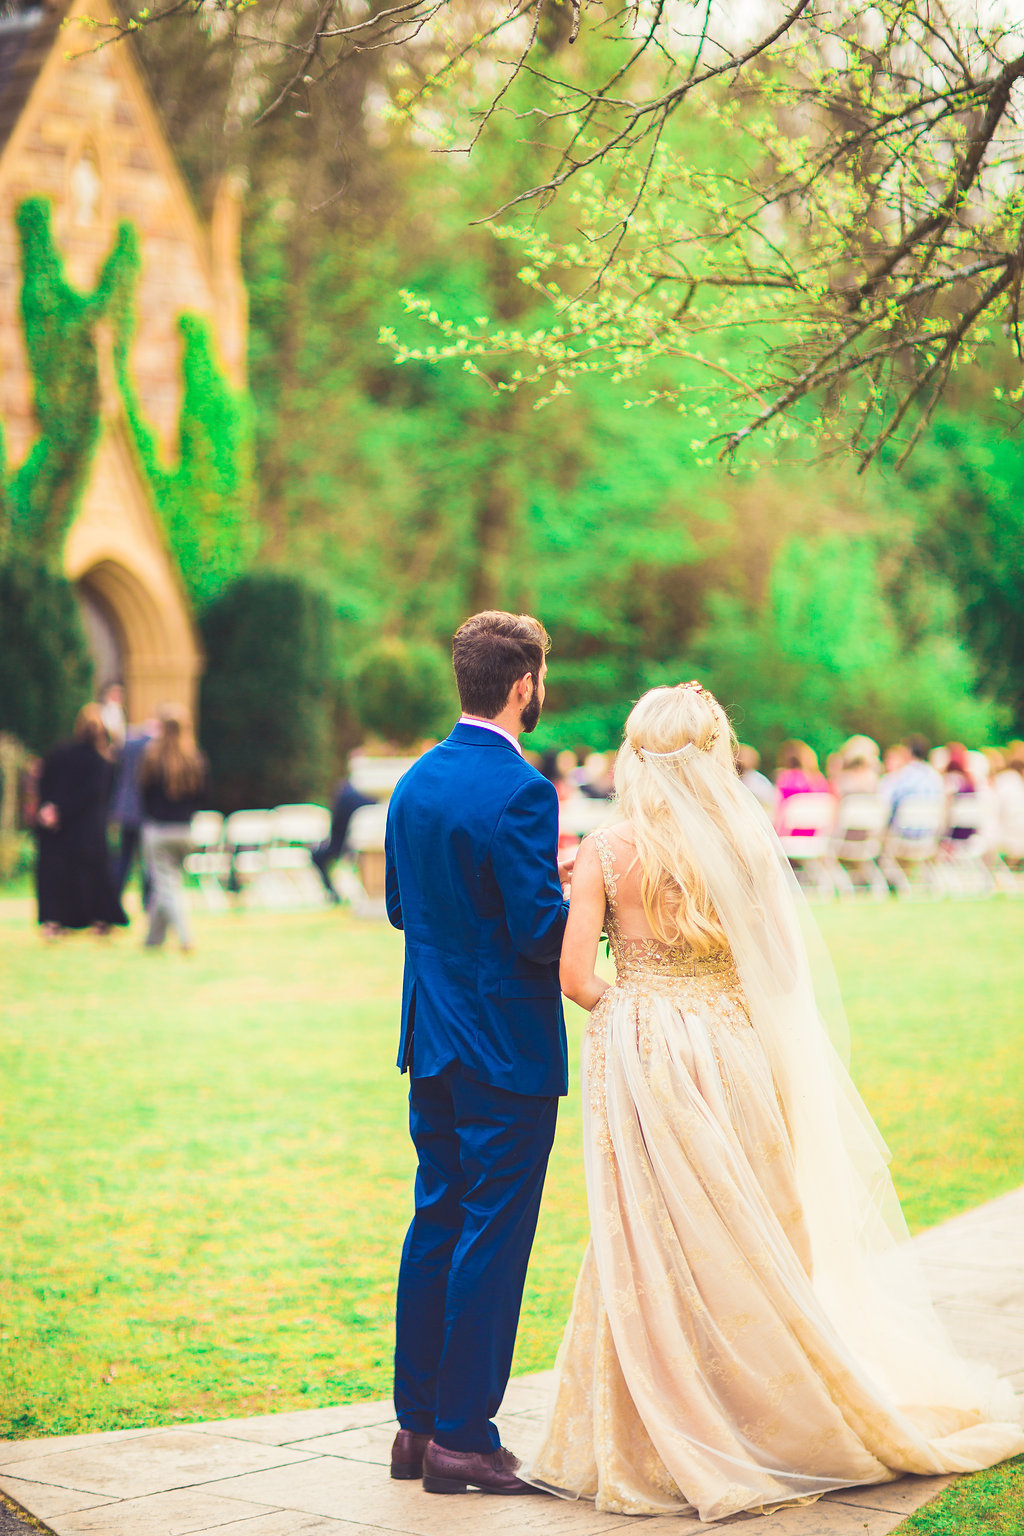 Wedding Photograph Of Bride in Her Wedding Dress and Groom in Blue Suit Standing Los Angeles